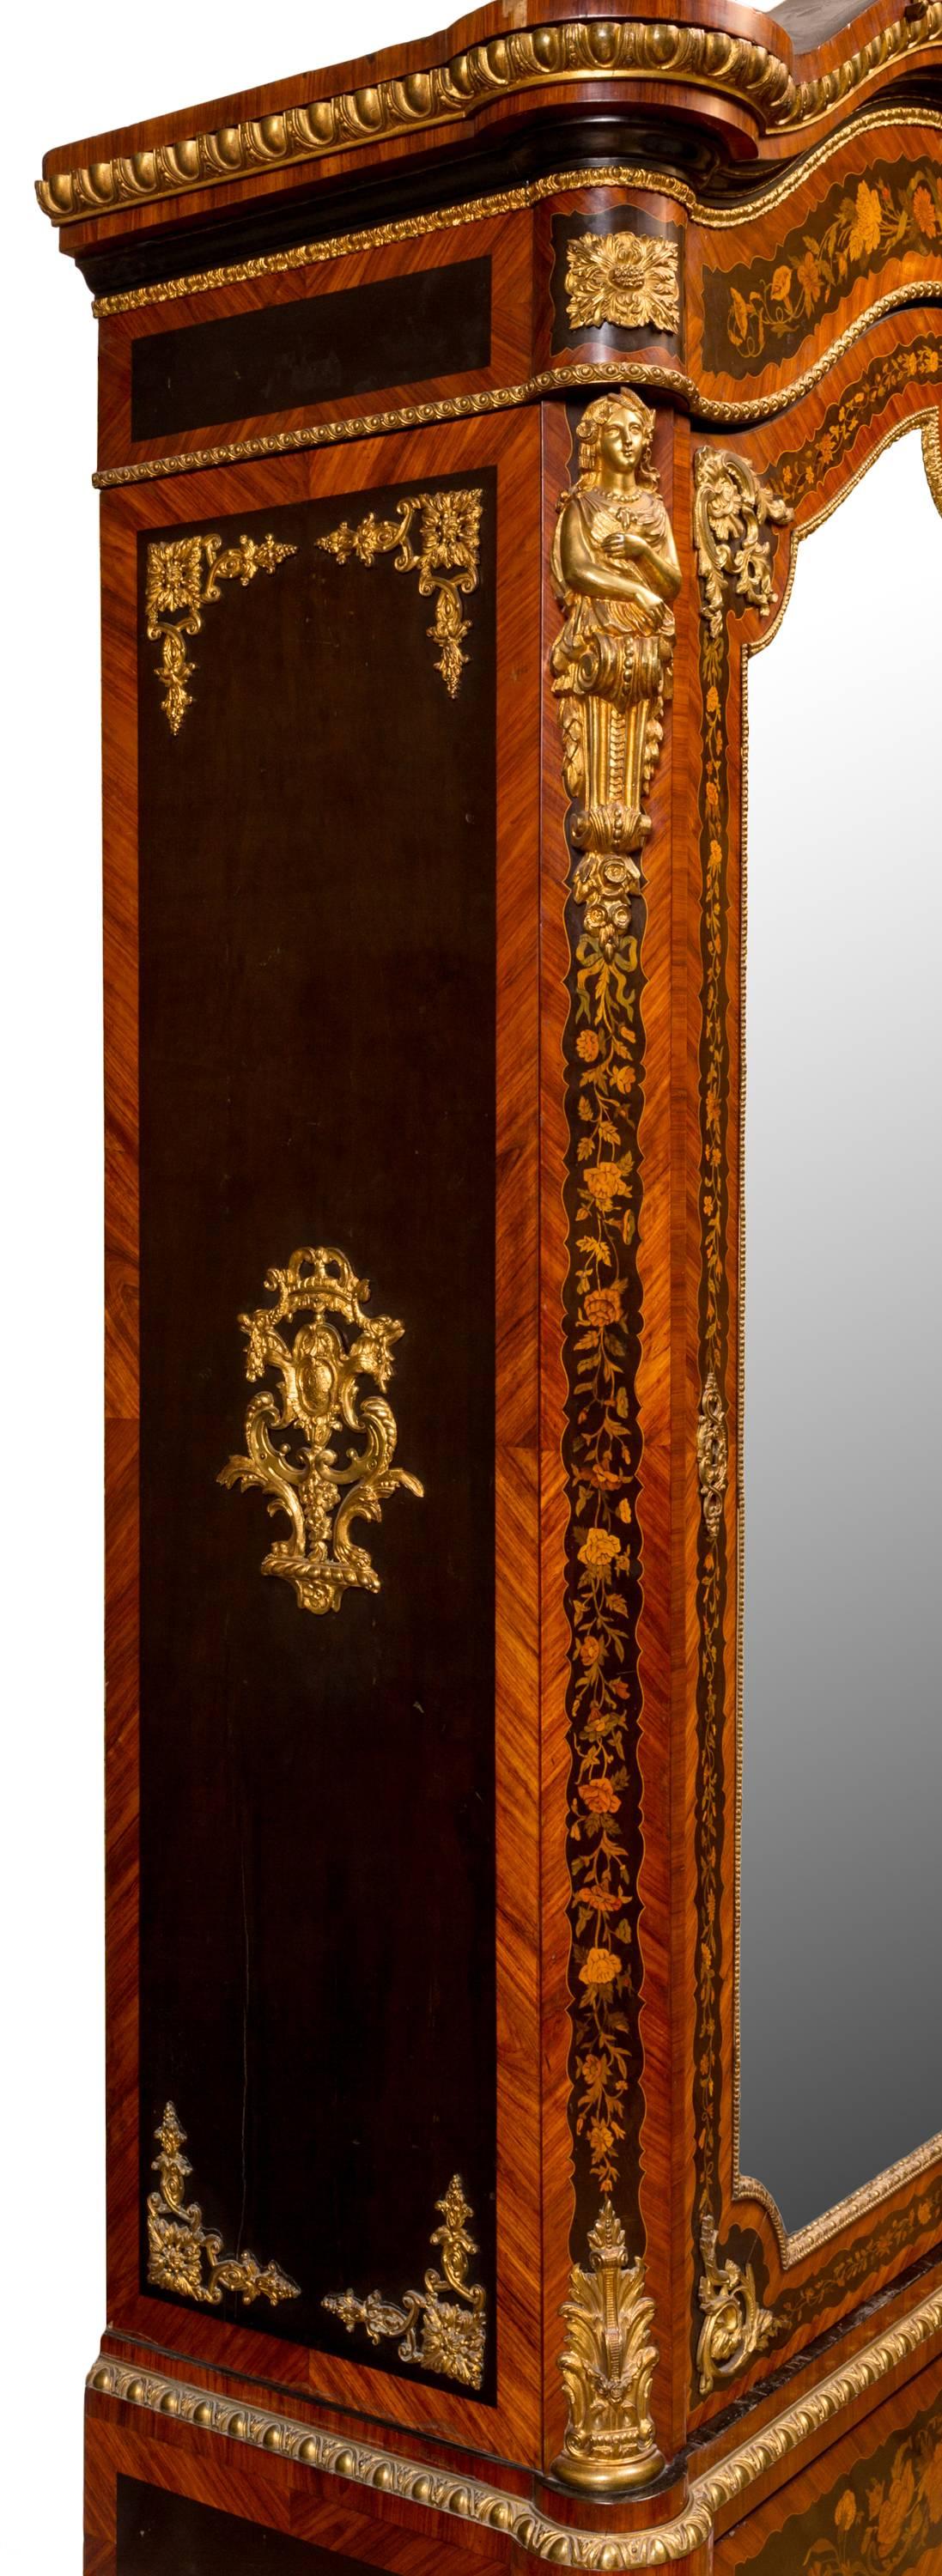 French 19th Century Louis XVI Style Mirror Front Armoire or Wardrobe with Marquetry